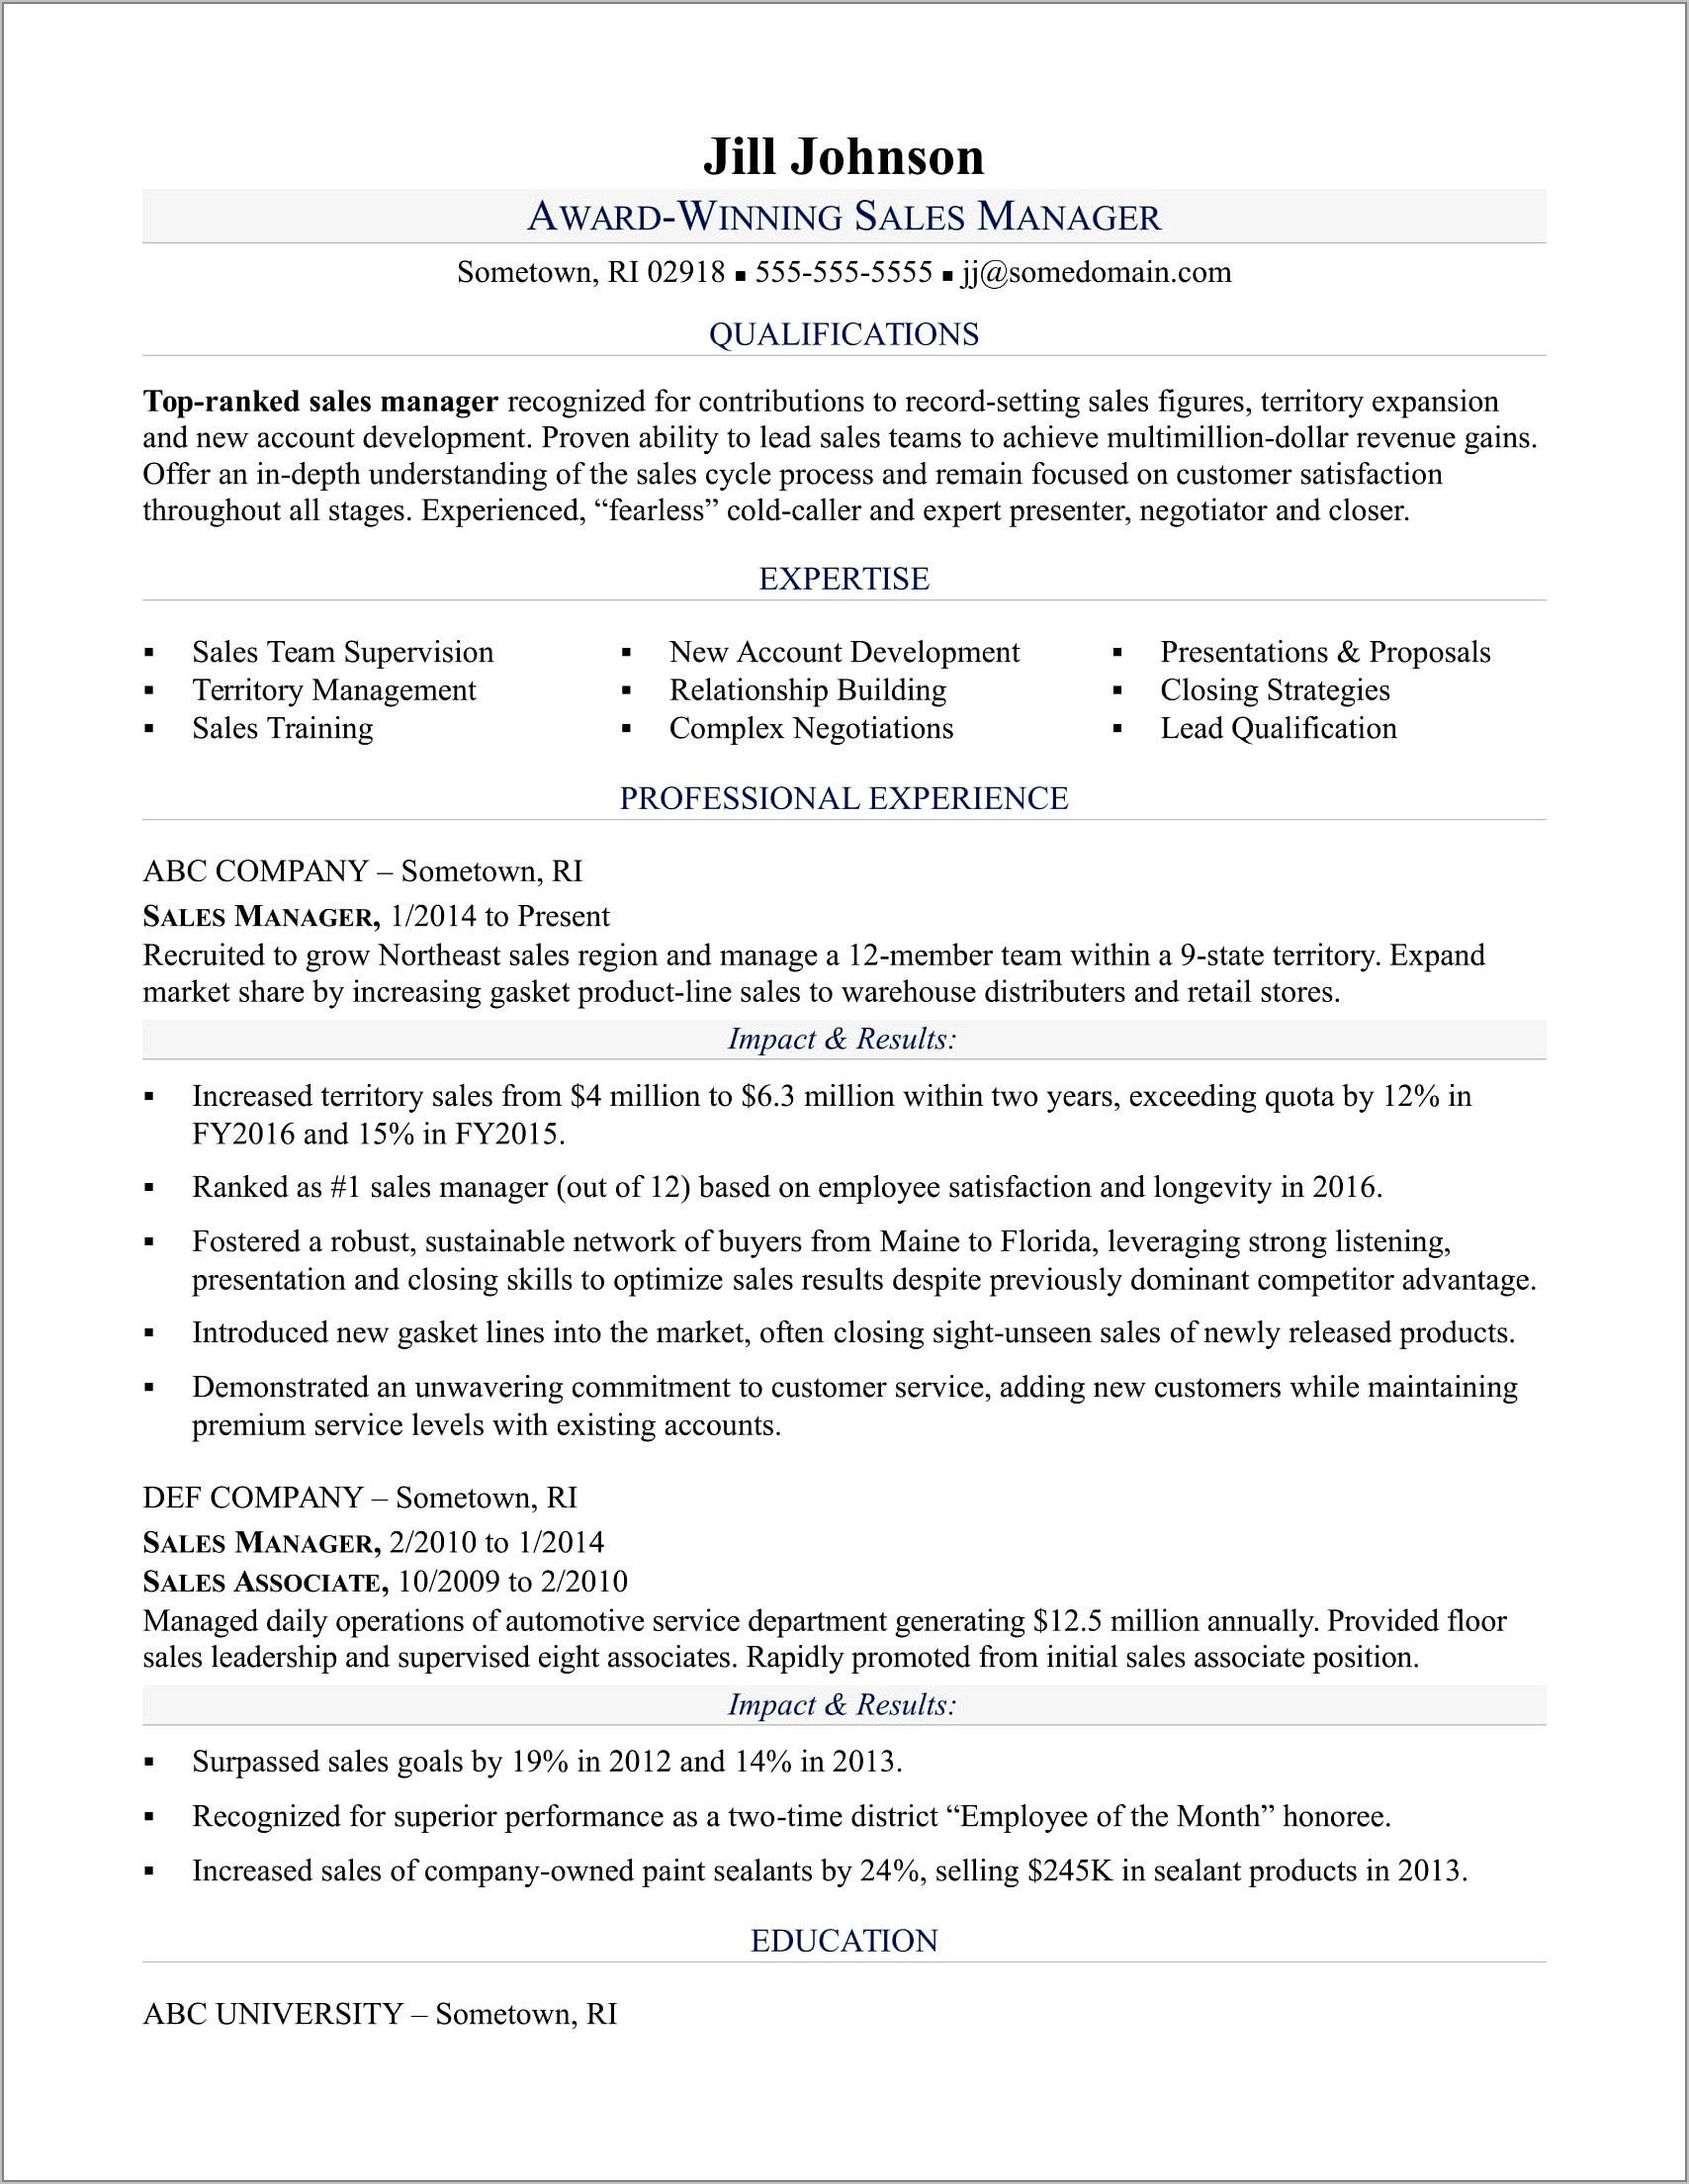 Sample Resumes For Sales Executives